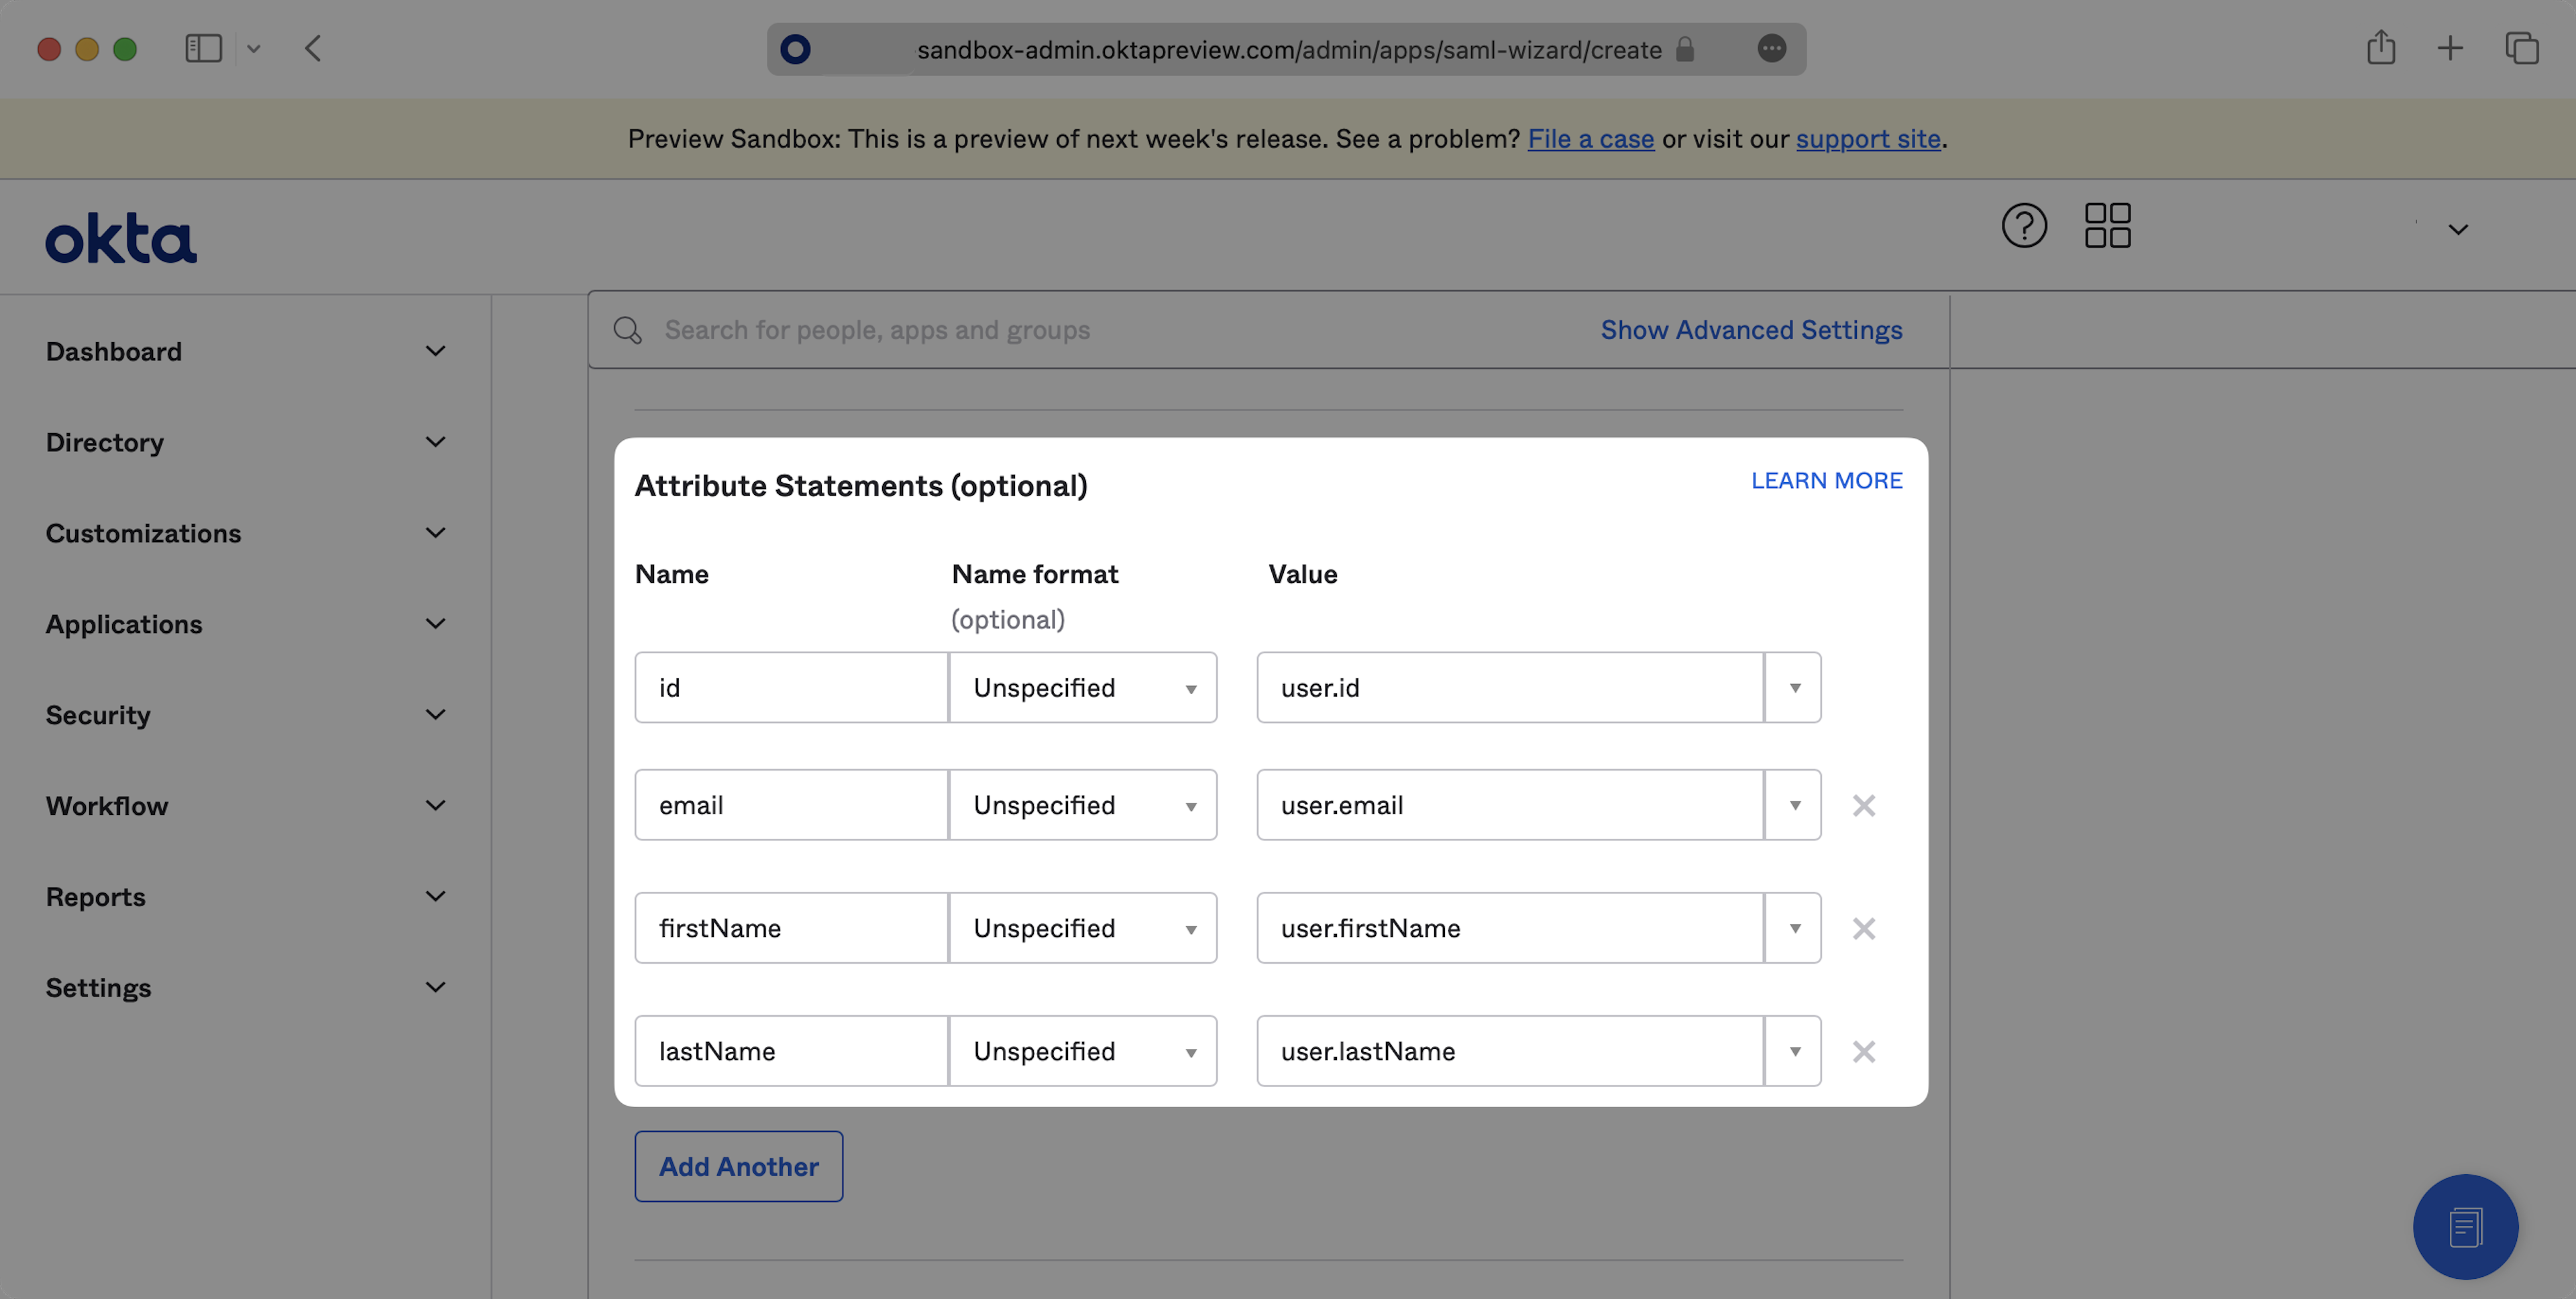 A screenshot showing the configuration of the 'Attribute Statements' in the Okta dashboard.